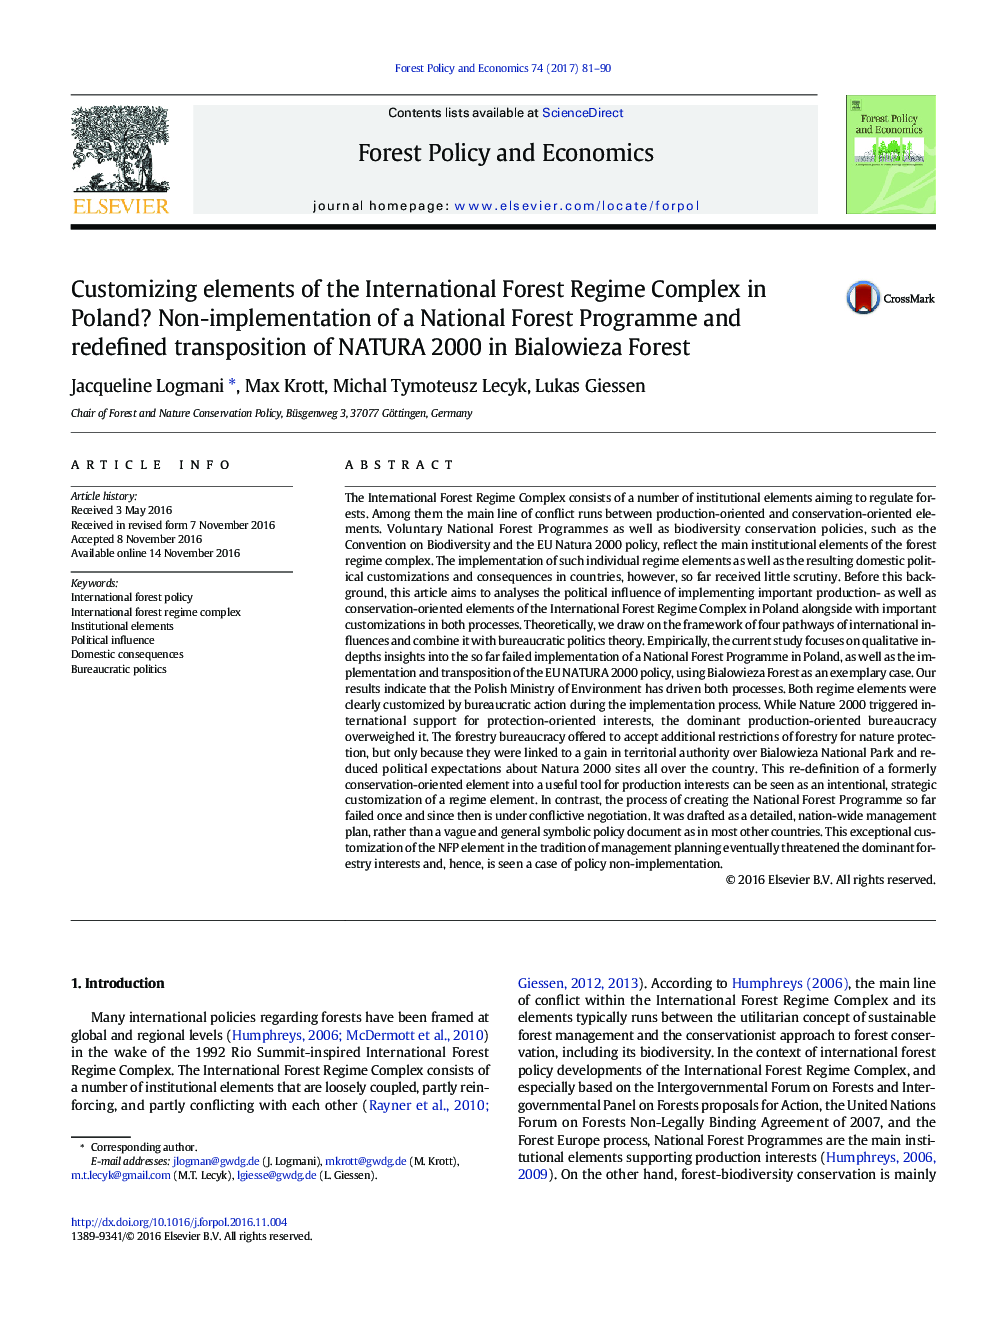 Customizing elements of the International Forest Regime Complex in Poland? Non-implementation of a National Forest Programme and redefined transposition of NATURA 2000 in Bialowieza Forest